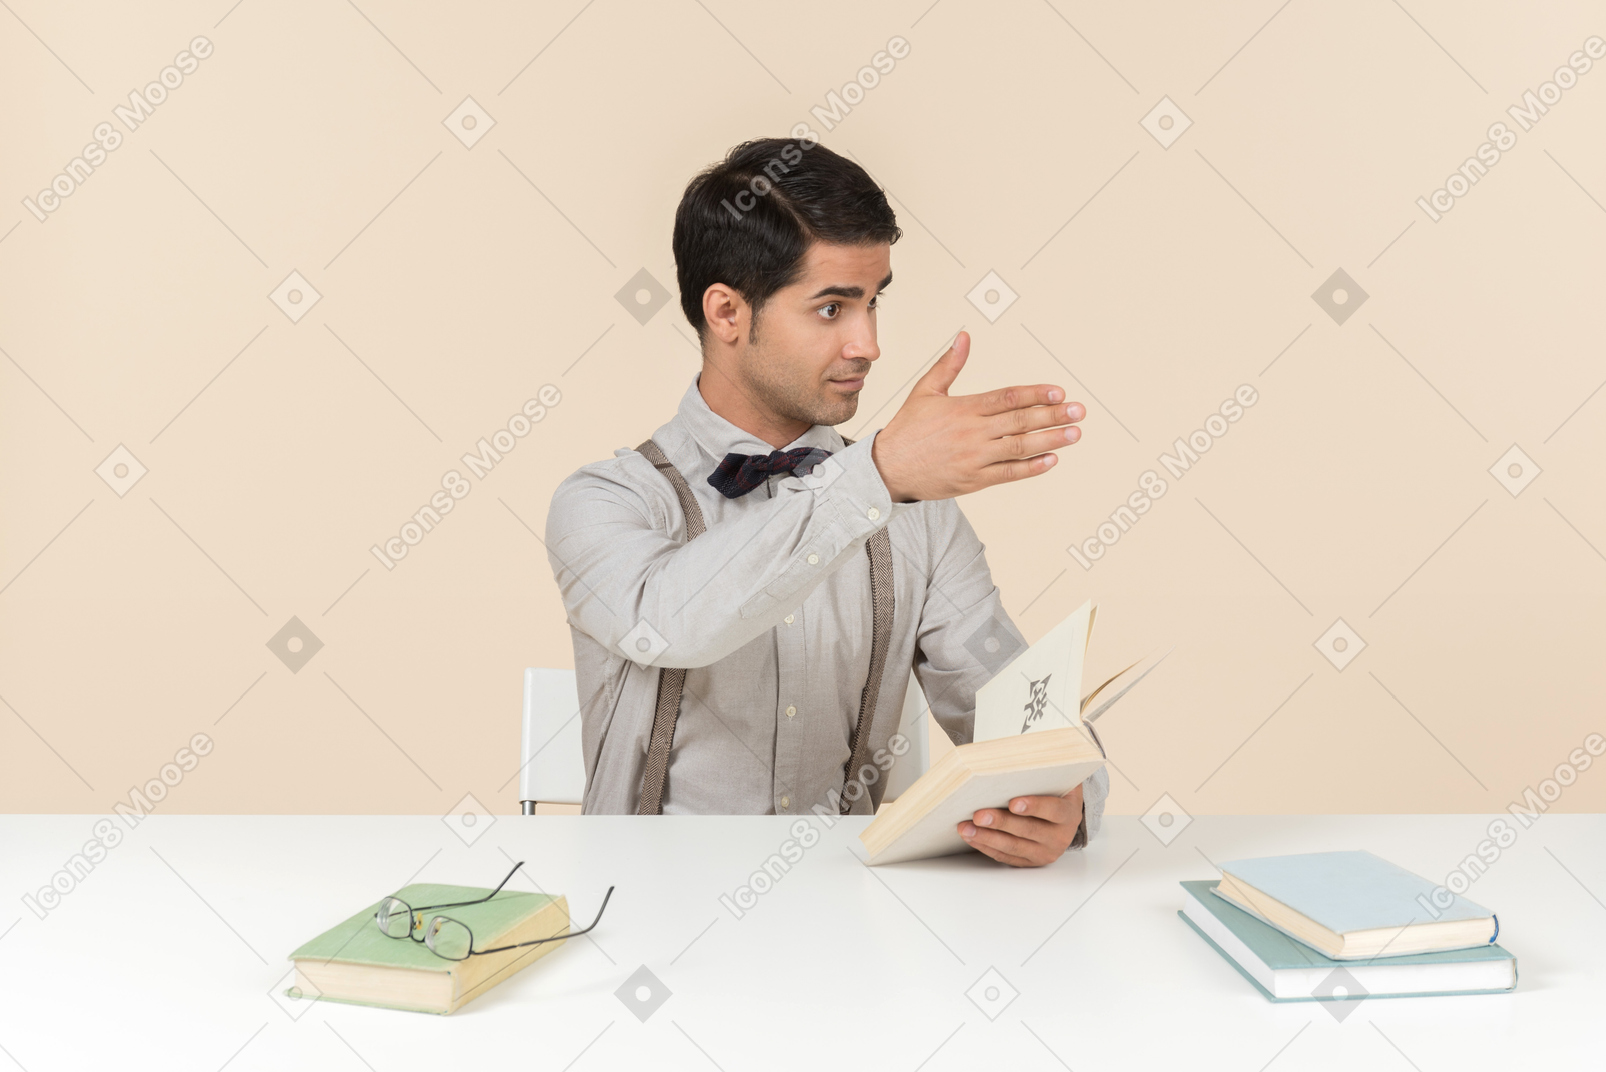 Young professor explaining something and pointing with a hand